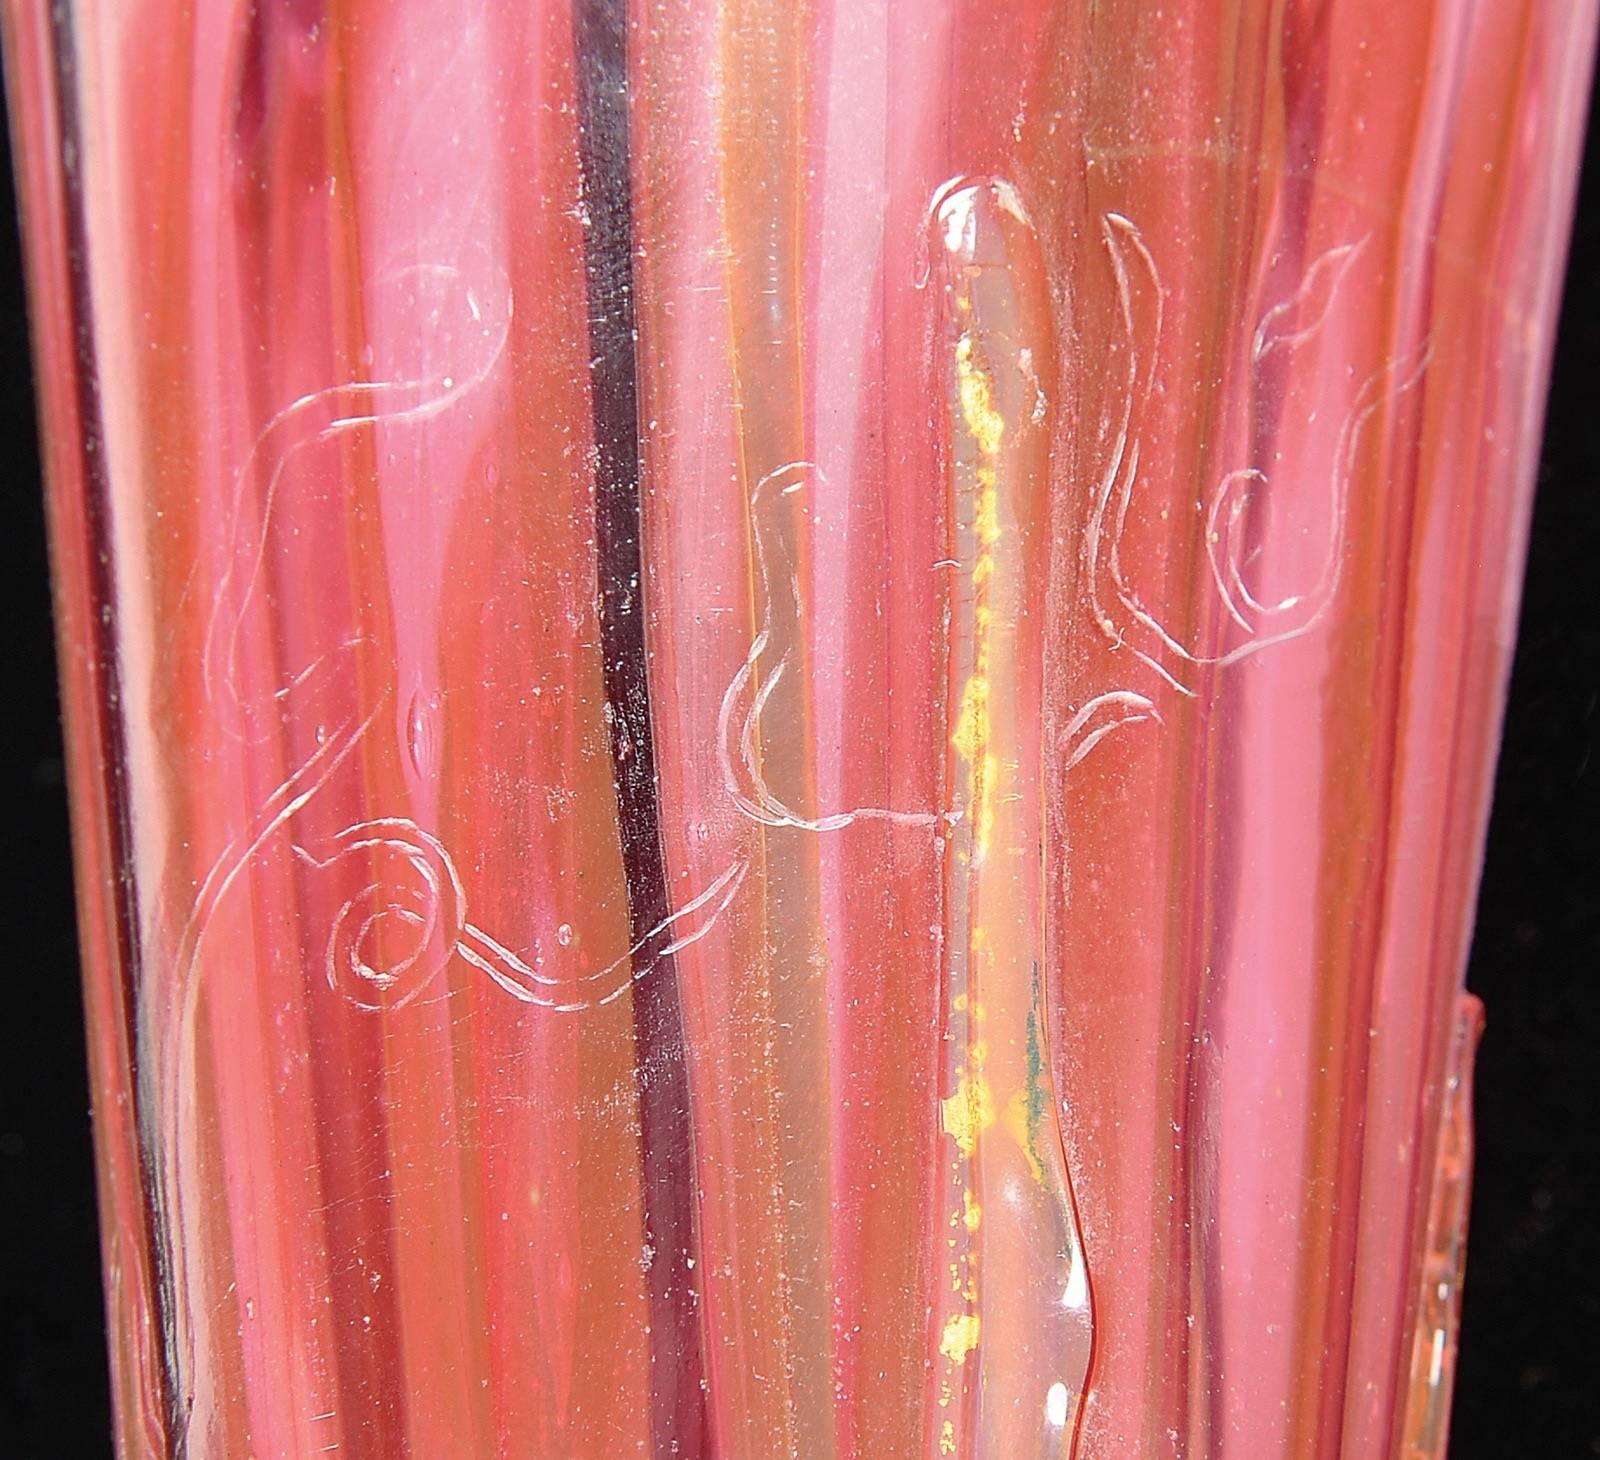 A marquetry glass vase by Émile Gallé, this unique piece features a delicate, nearly translucent arrangement of crocus flowers in hues of orange and purple, against a soft, milky, cream-colored background. The French Art Nouveau vase's composition